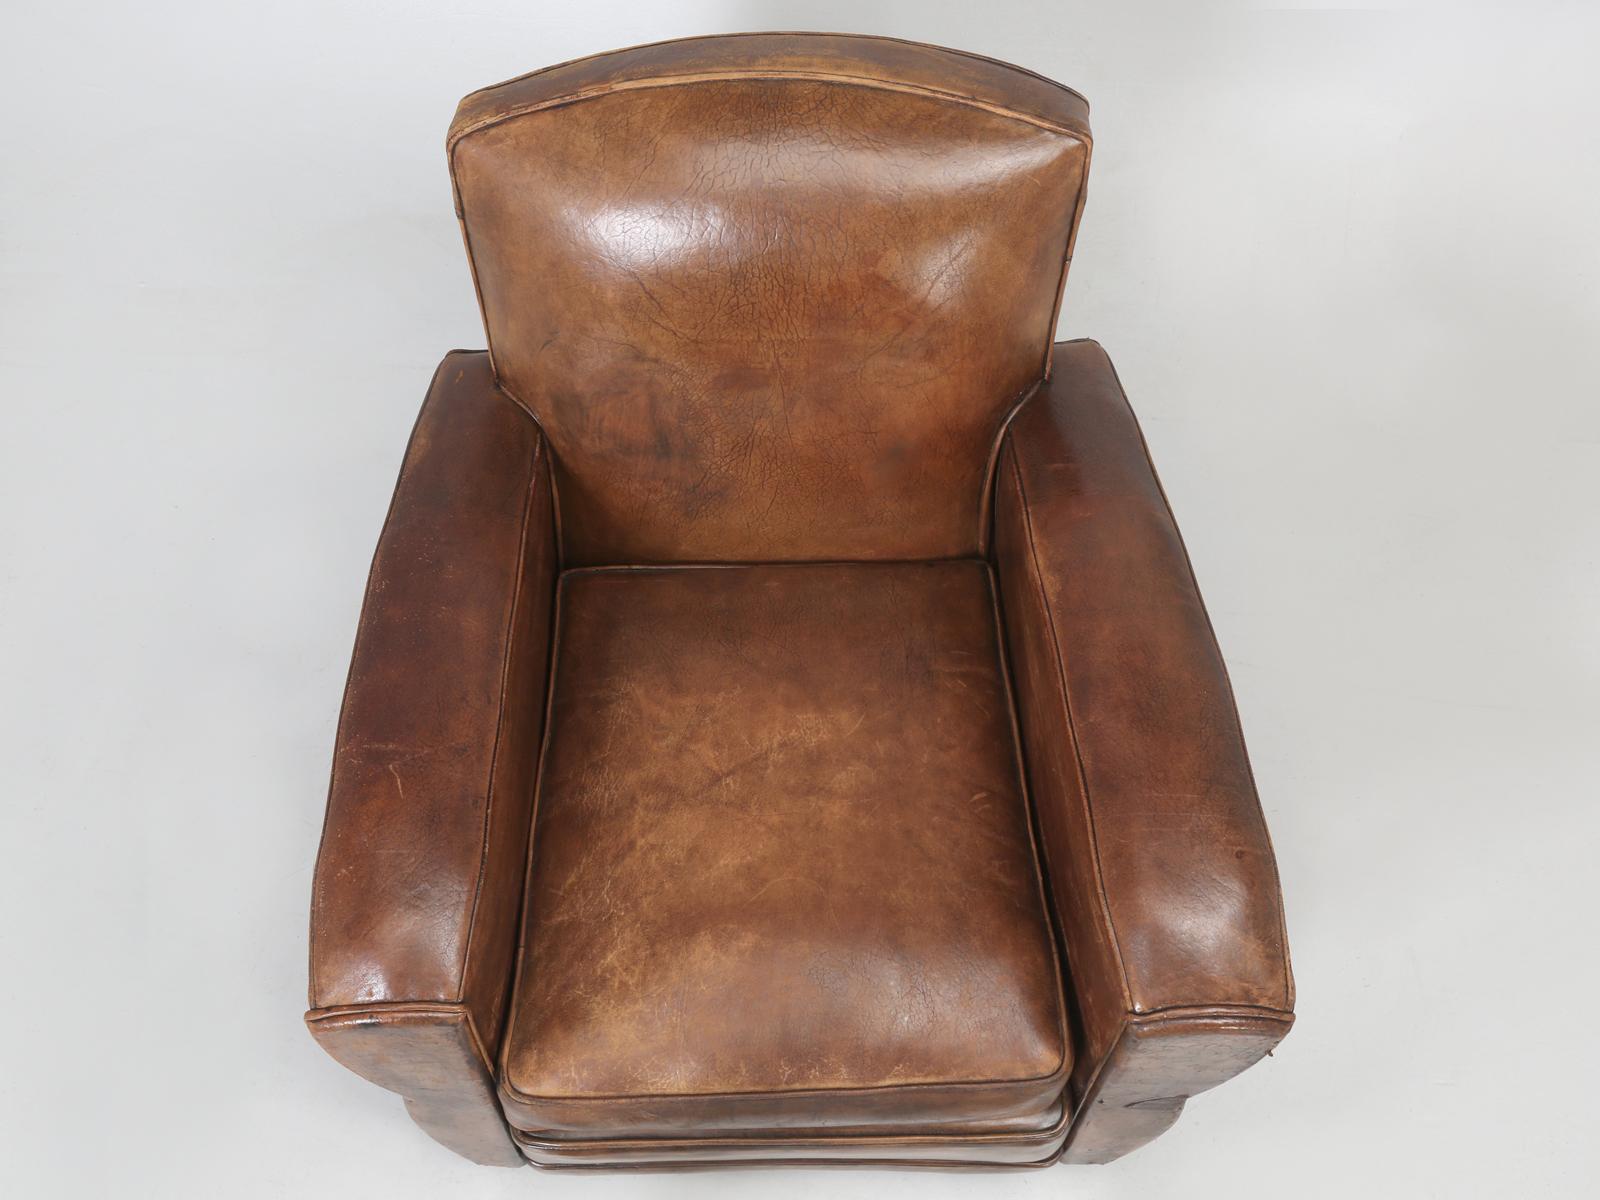 Hand-Crafted French Leather Club Chair Restored Internally, but Kept Cosmetically Original